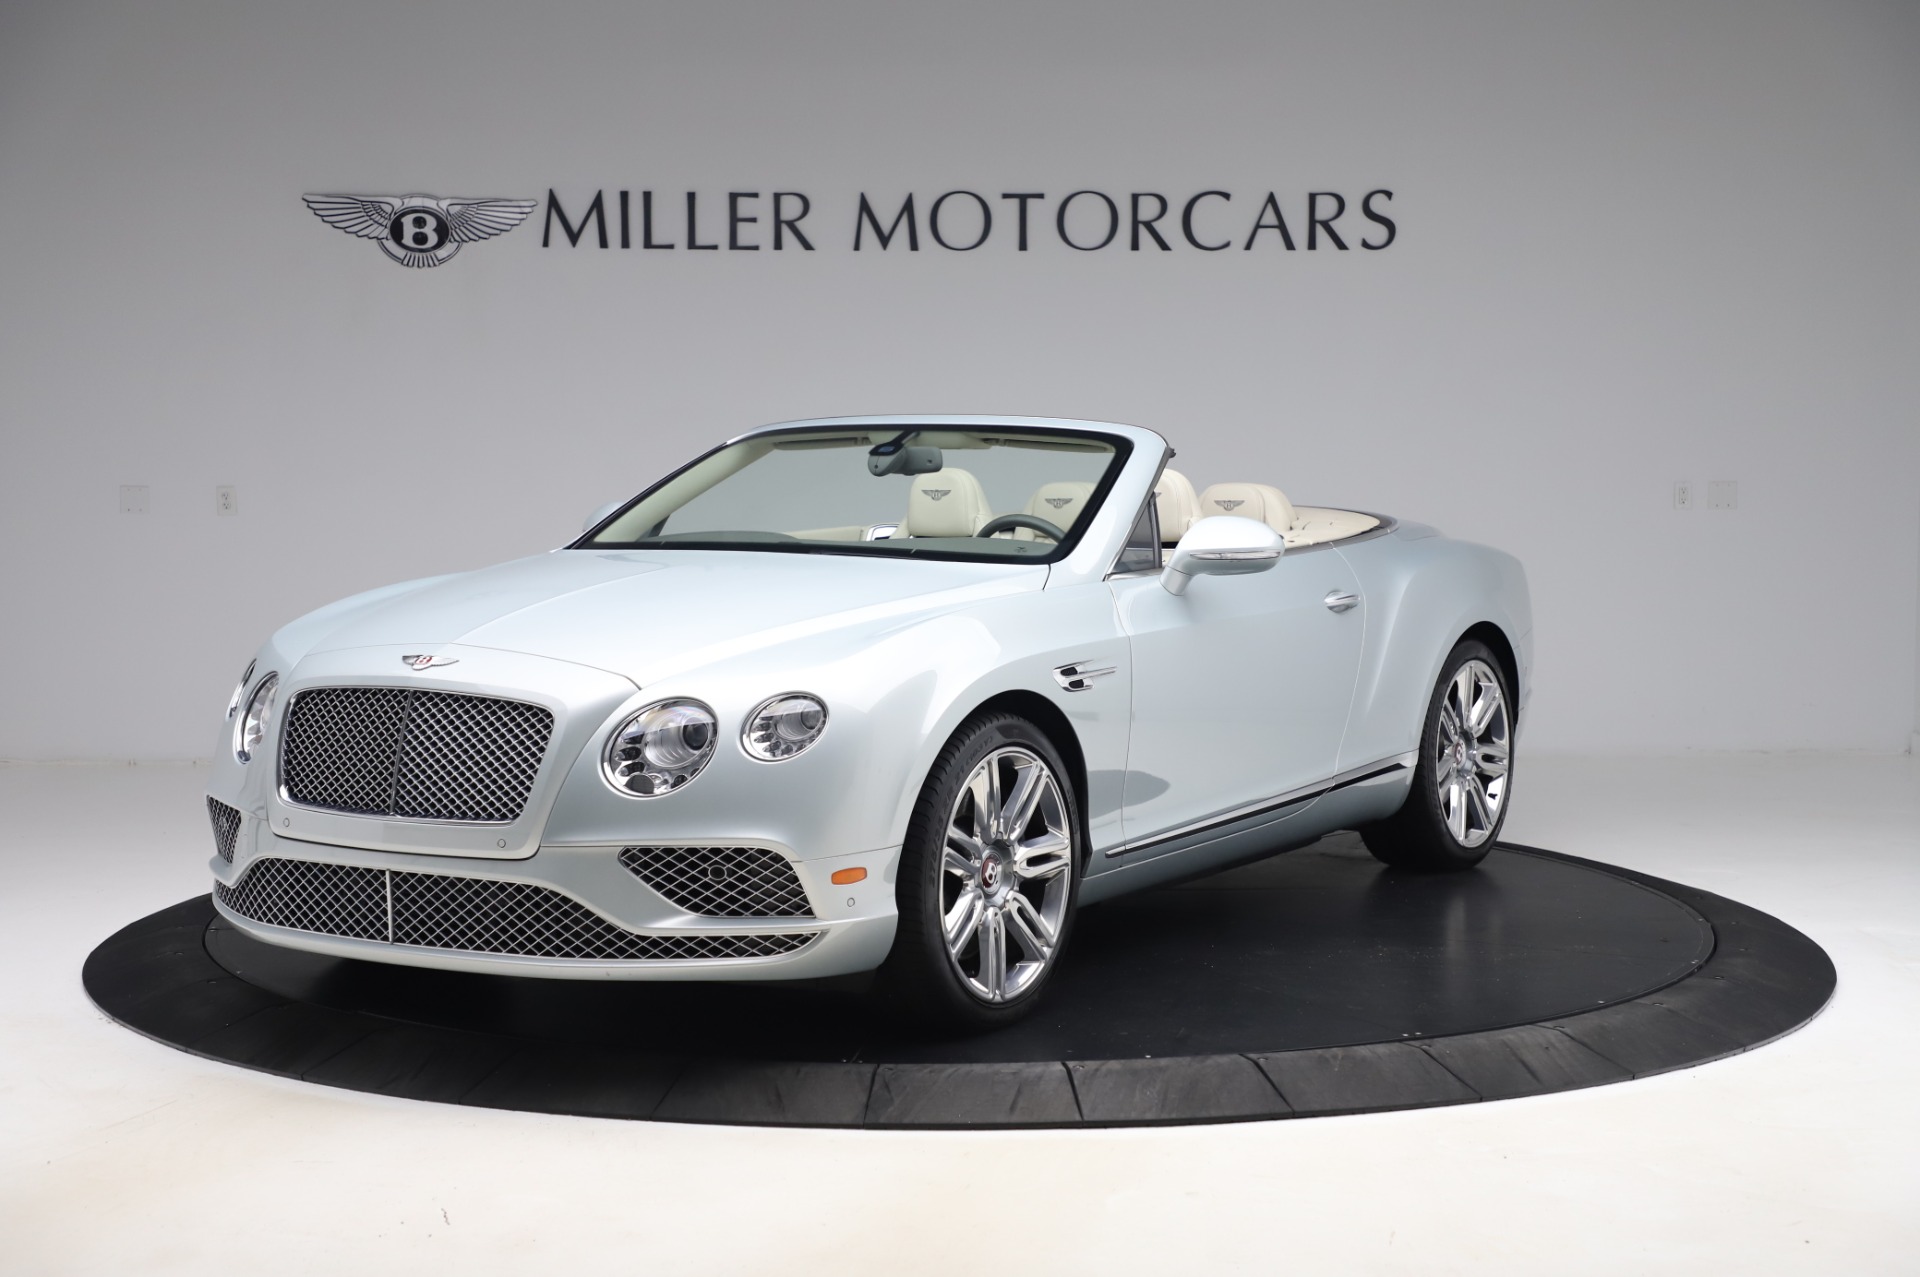 Used 2017 Bentley Continental GTC V8 for sale Sold at Aston Martin of Greenwich in Greenwich CT 06830 1